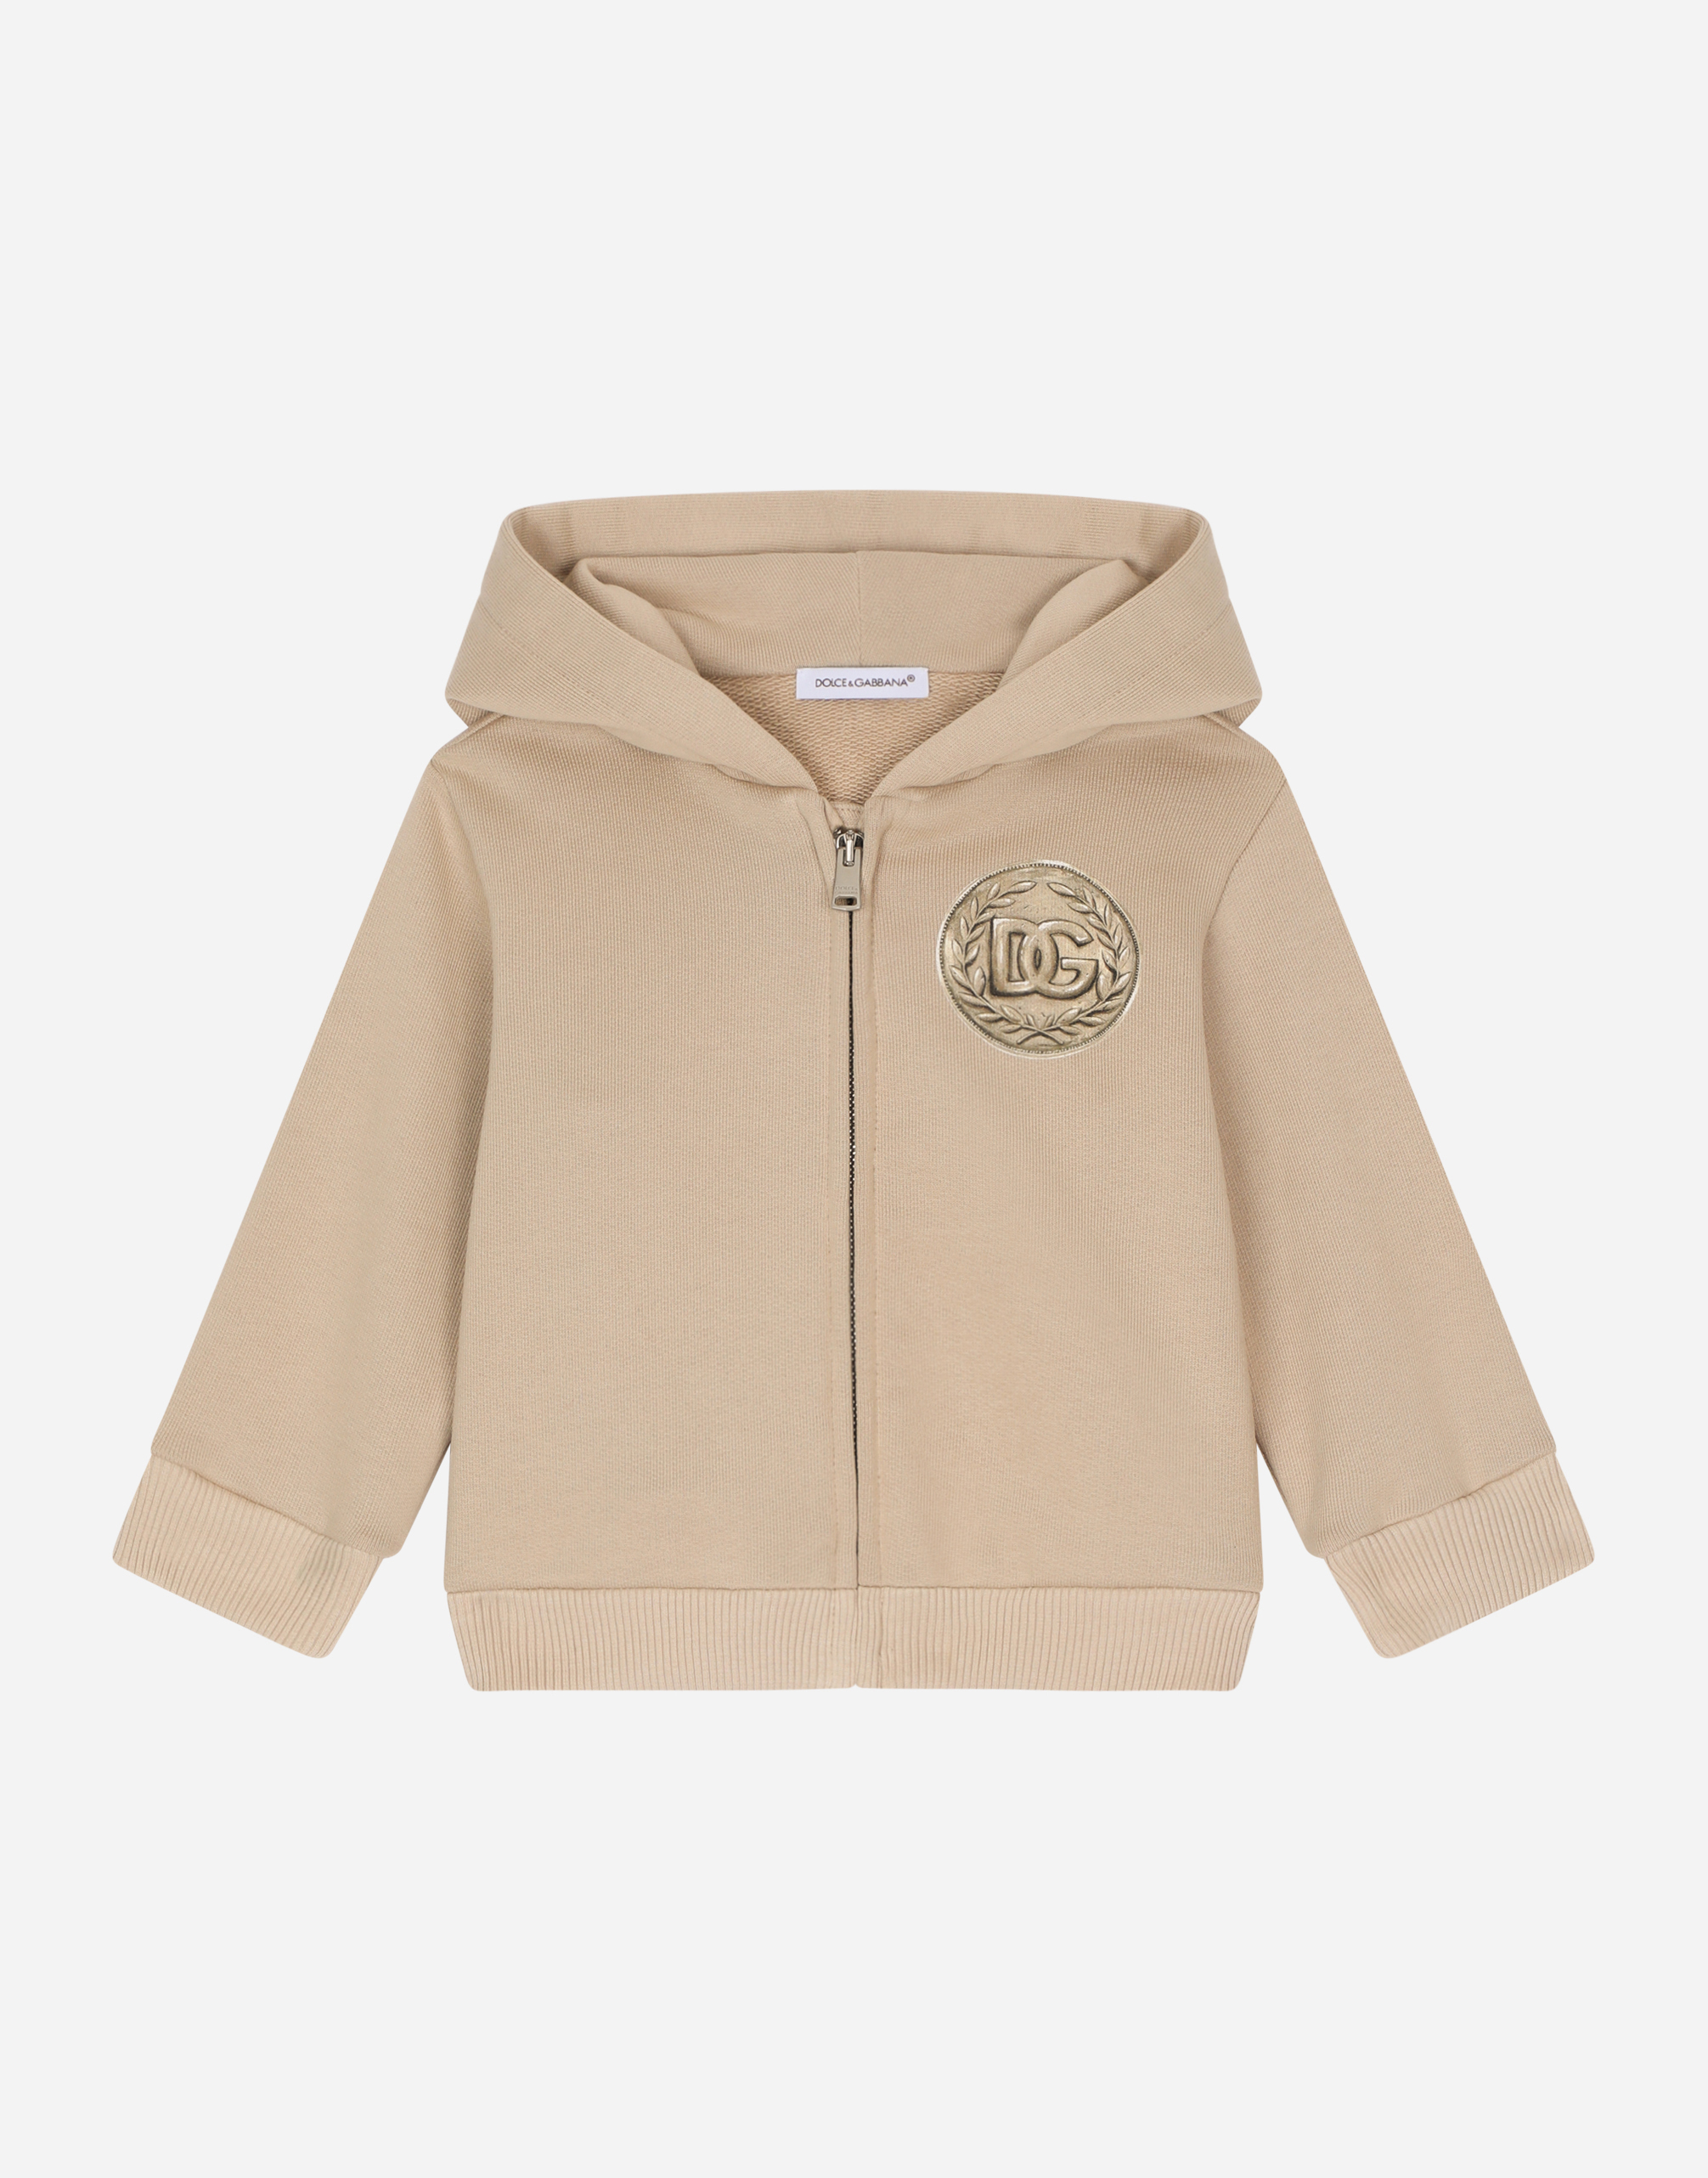 DOLCE & GABBANA ZIP-UP JERSEY HOODIE WITH COIN PRINT